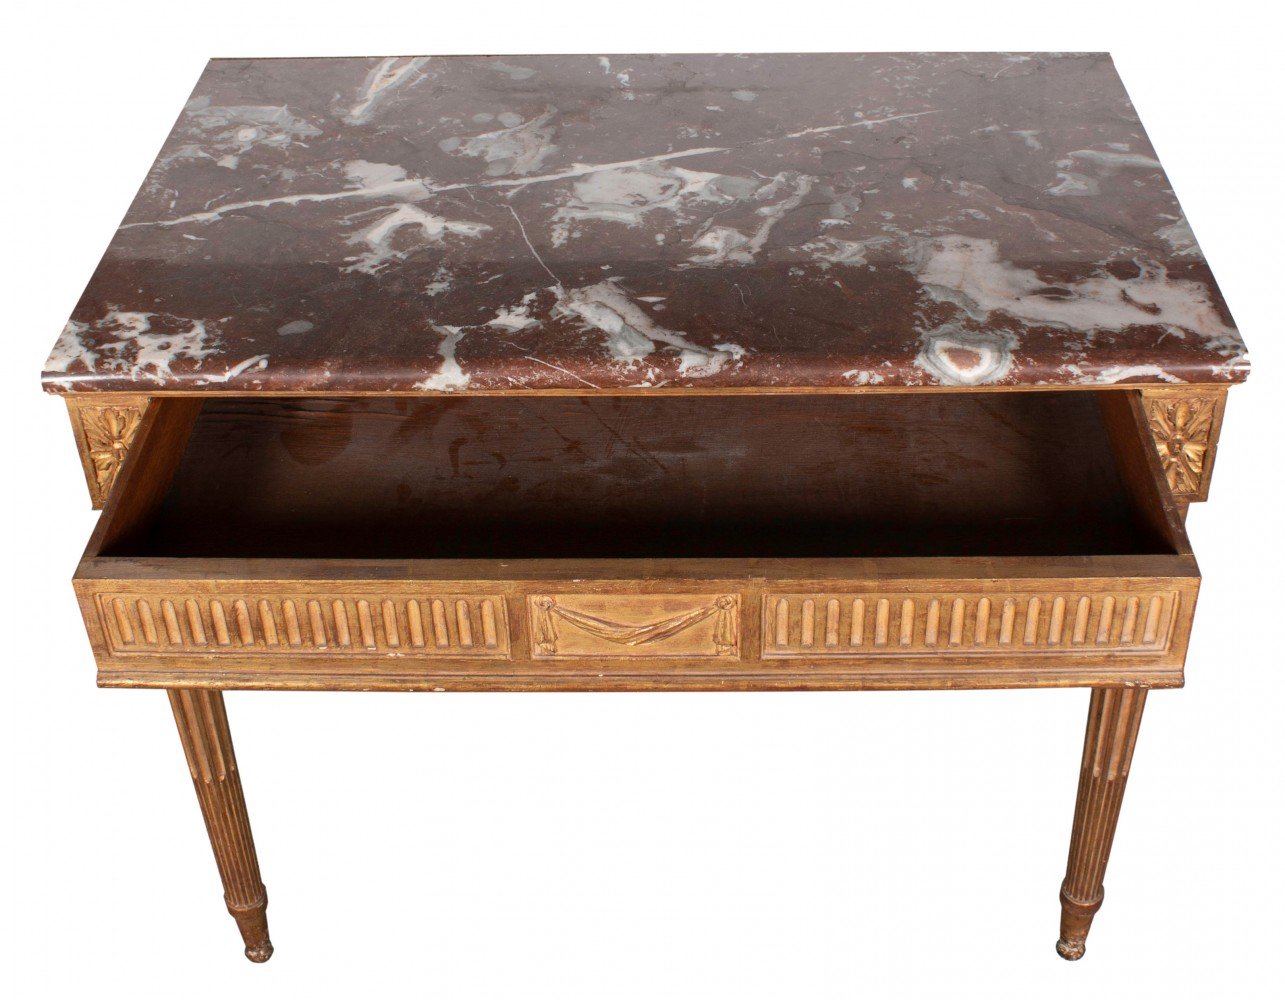 19th Century French Finely Carved Marble Top Louis XVI Style Bureau (Writing Desk)